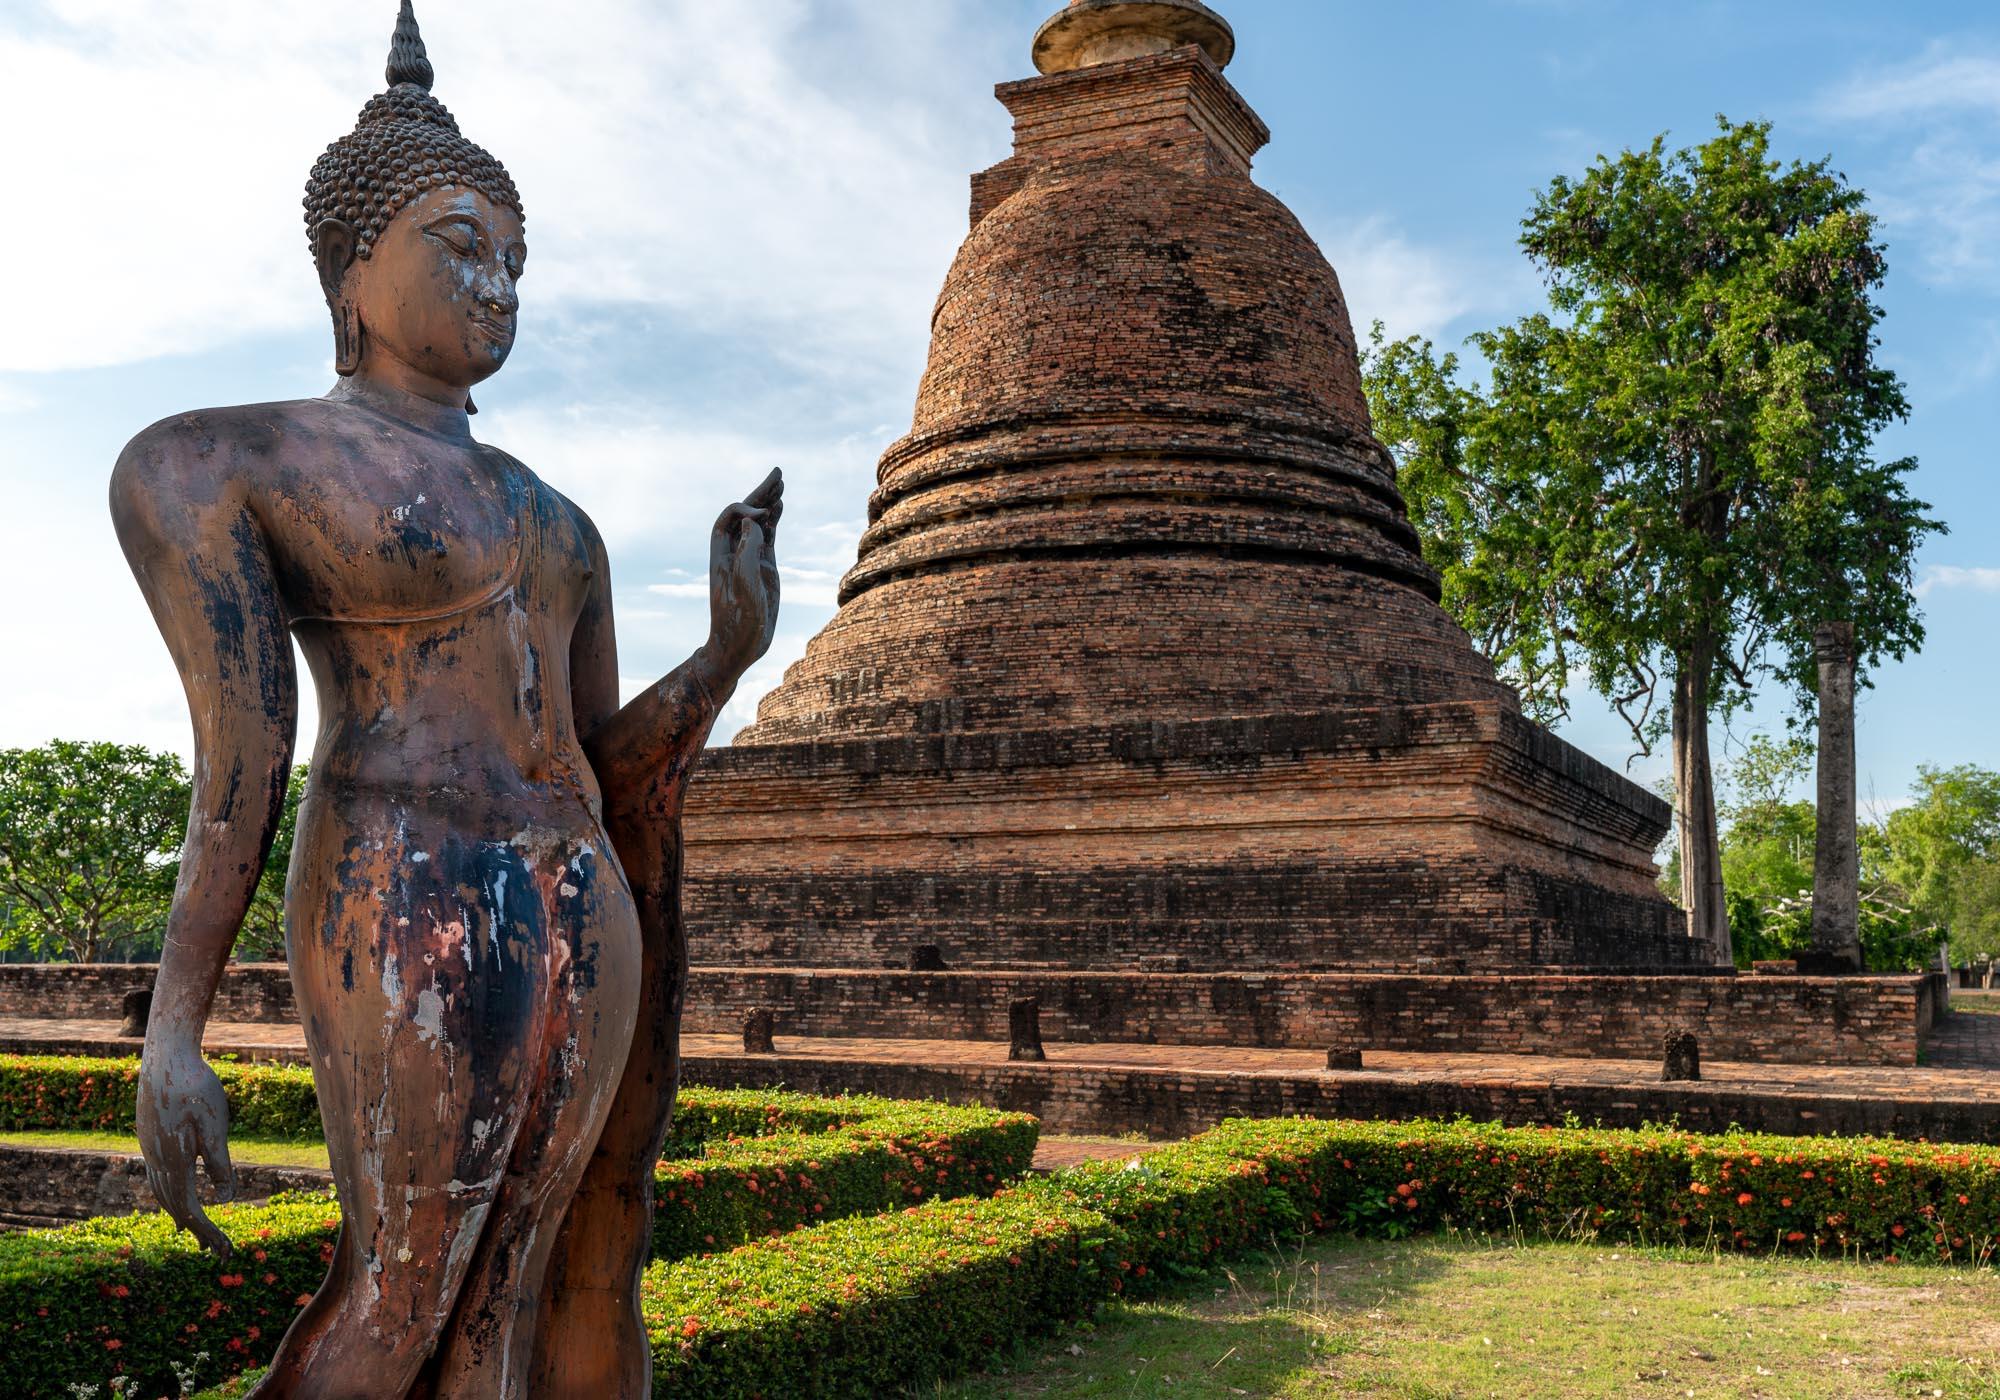 A statue in the Sukhothai style alongside the central stupa of Wat Sa Si on an island in a reservoir. – © Michael Turtle